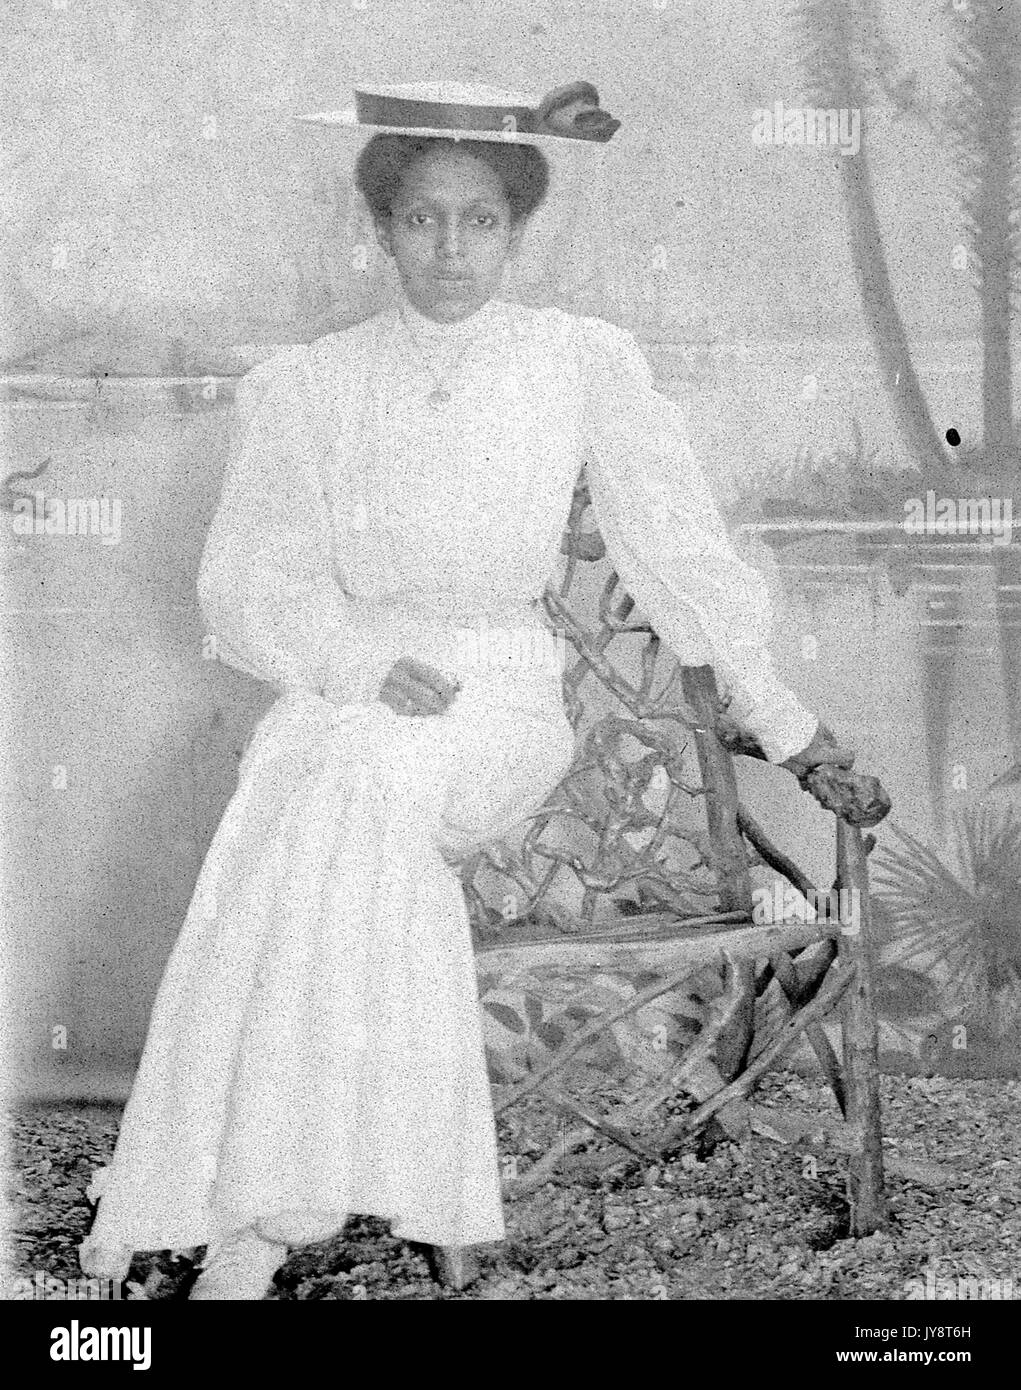 Full length portrait of African American woman wearing a hat and sitting on a handmade chair in a photographic studio, painted backdrop in the background shows a lake scene, 1915. Stock Photo